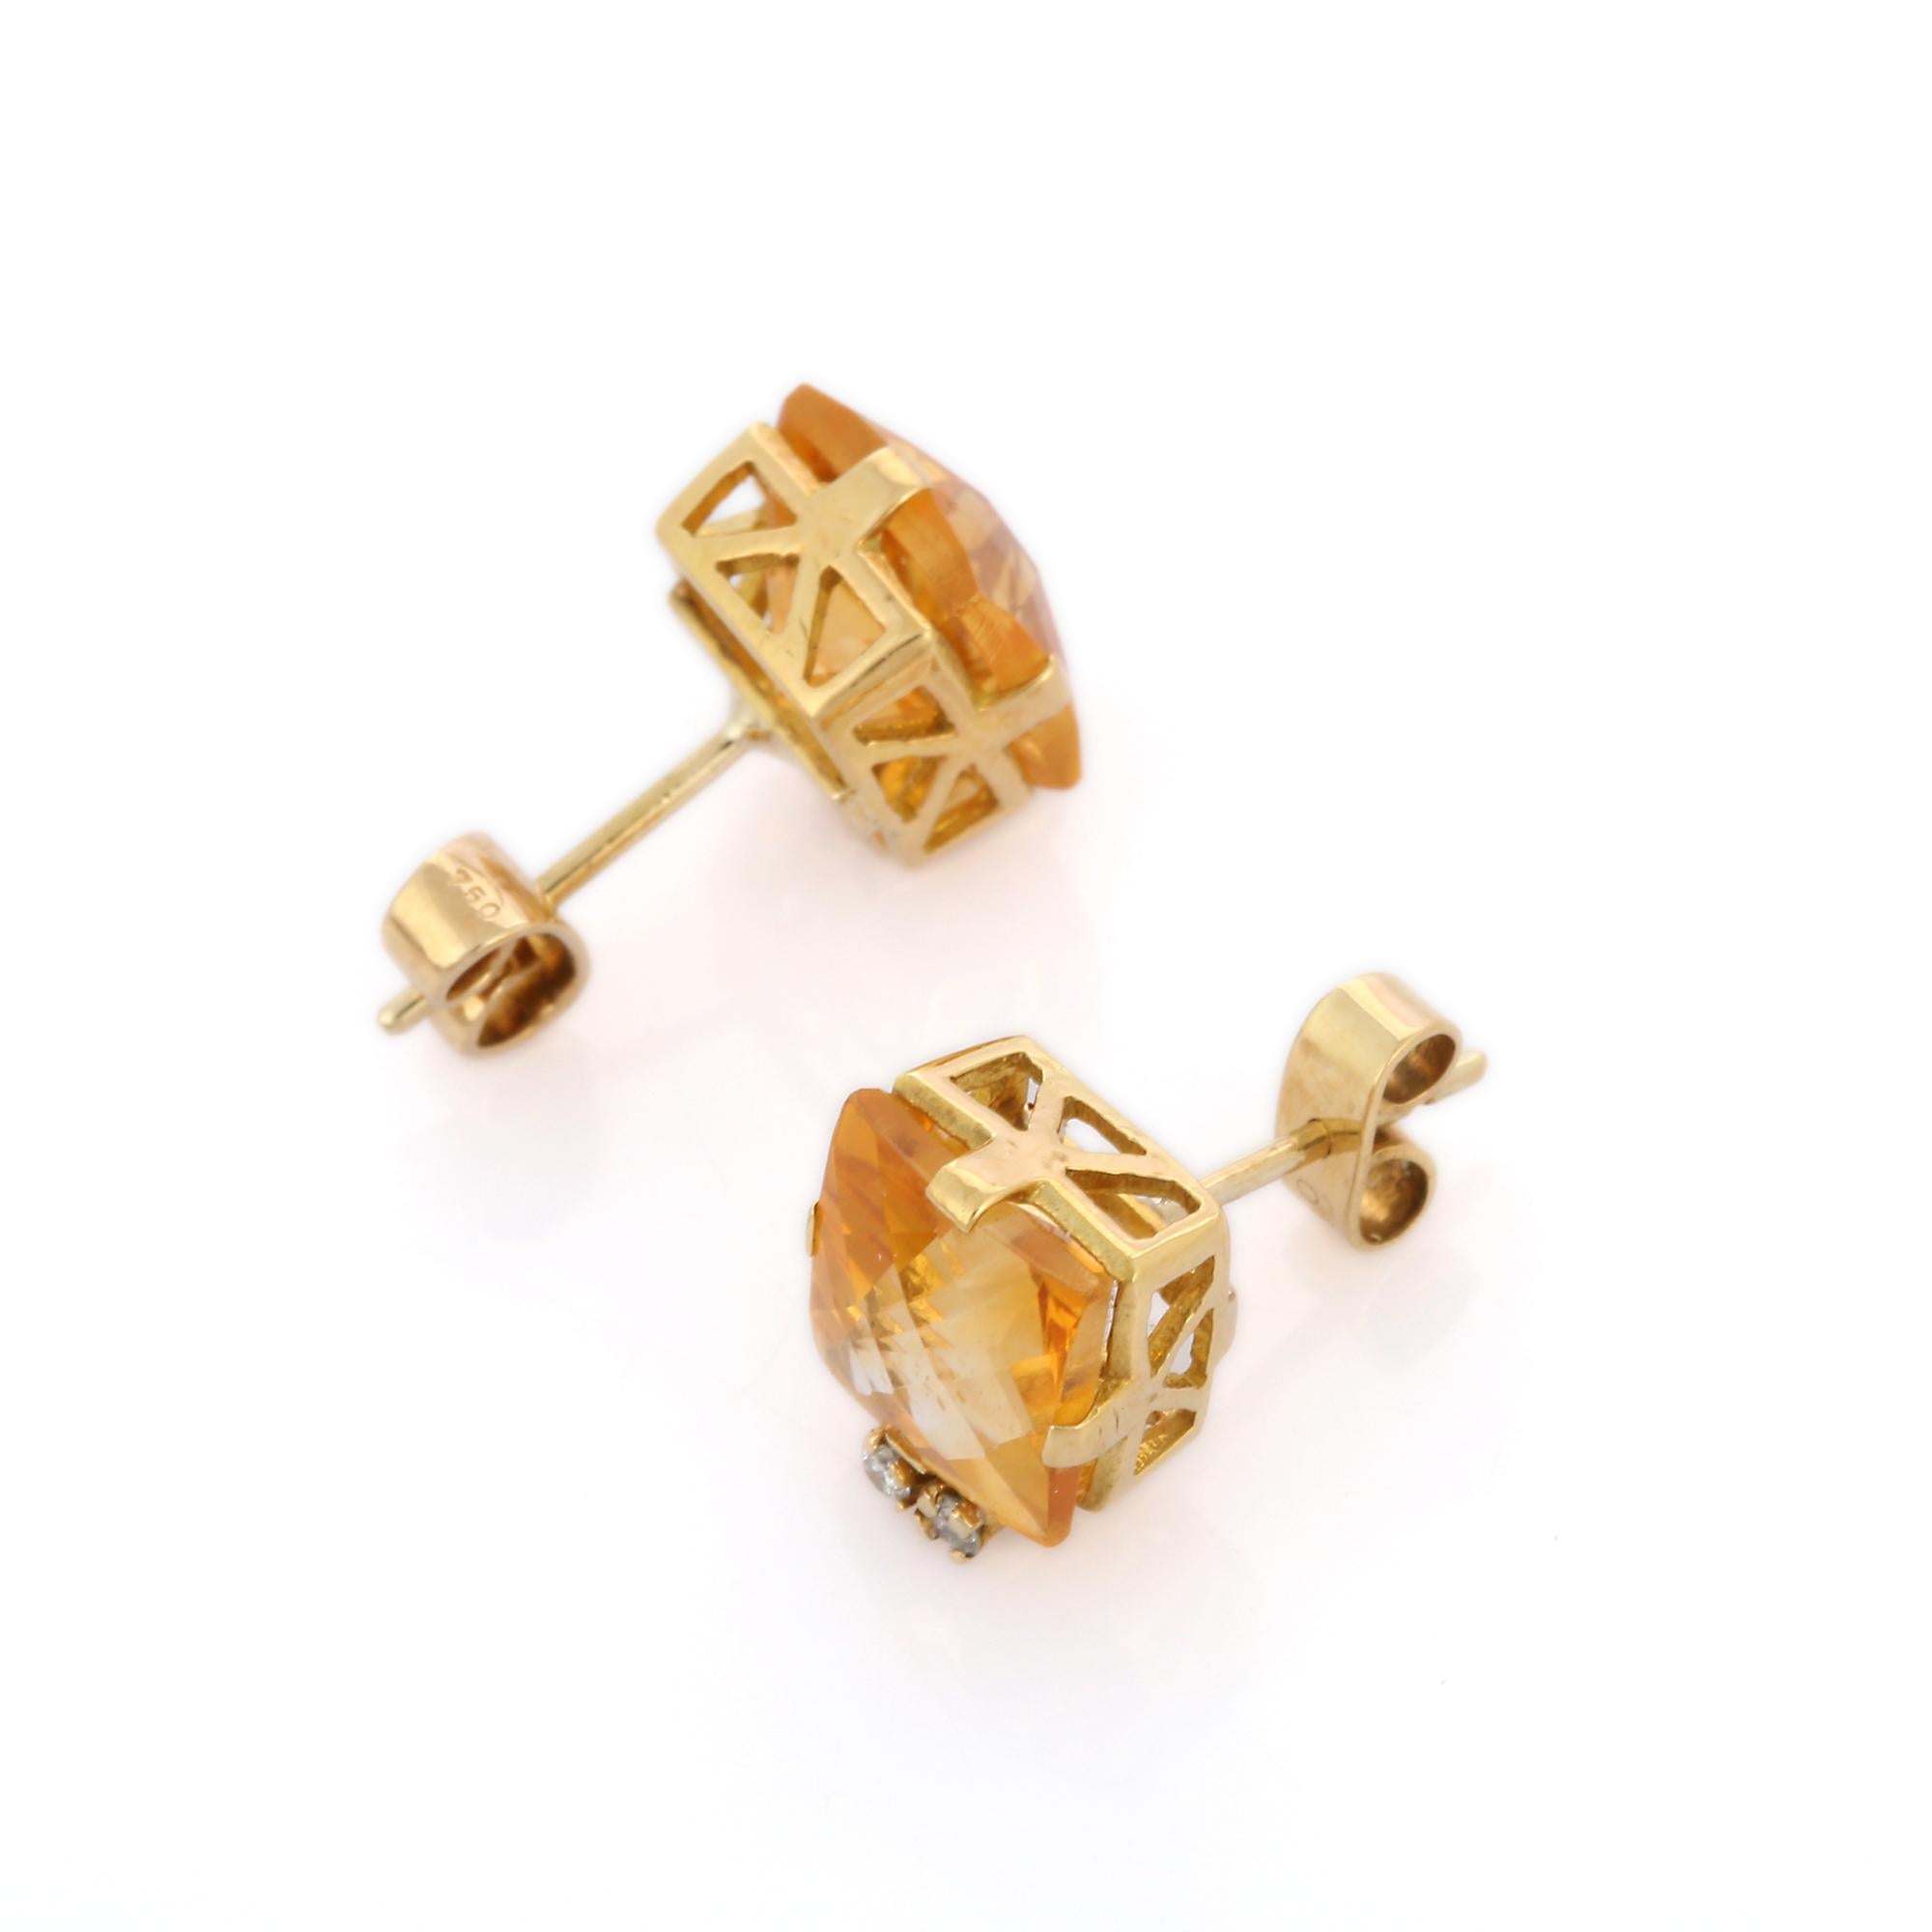 Earrings create a subtle beauty while showcasing the colors of the natural precious gemstones and illuminating diamonds making a statement.

Square cut Citrine Stud earrings in 18K gold. Embrace your look with these stunning pair of earrings